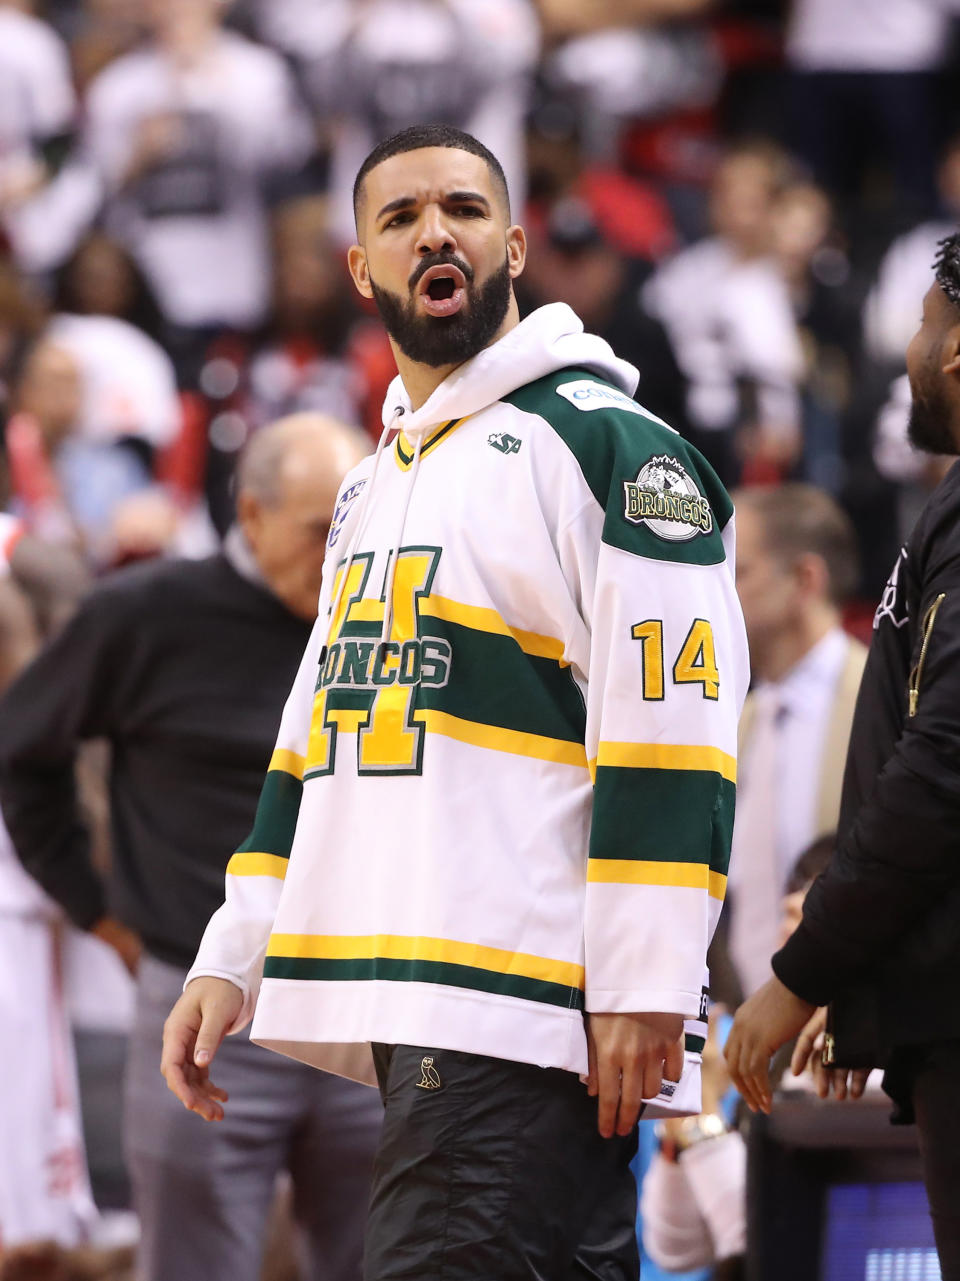 Drake at a sports event